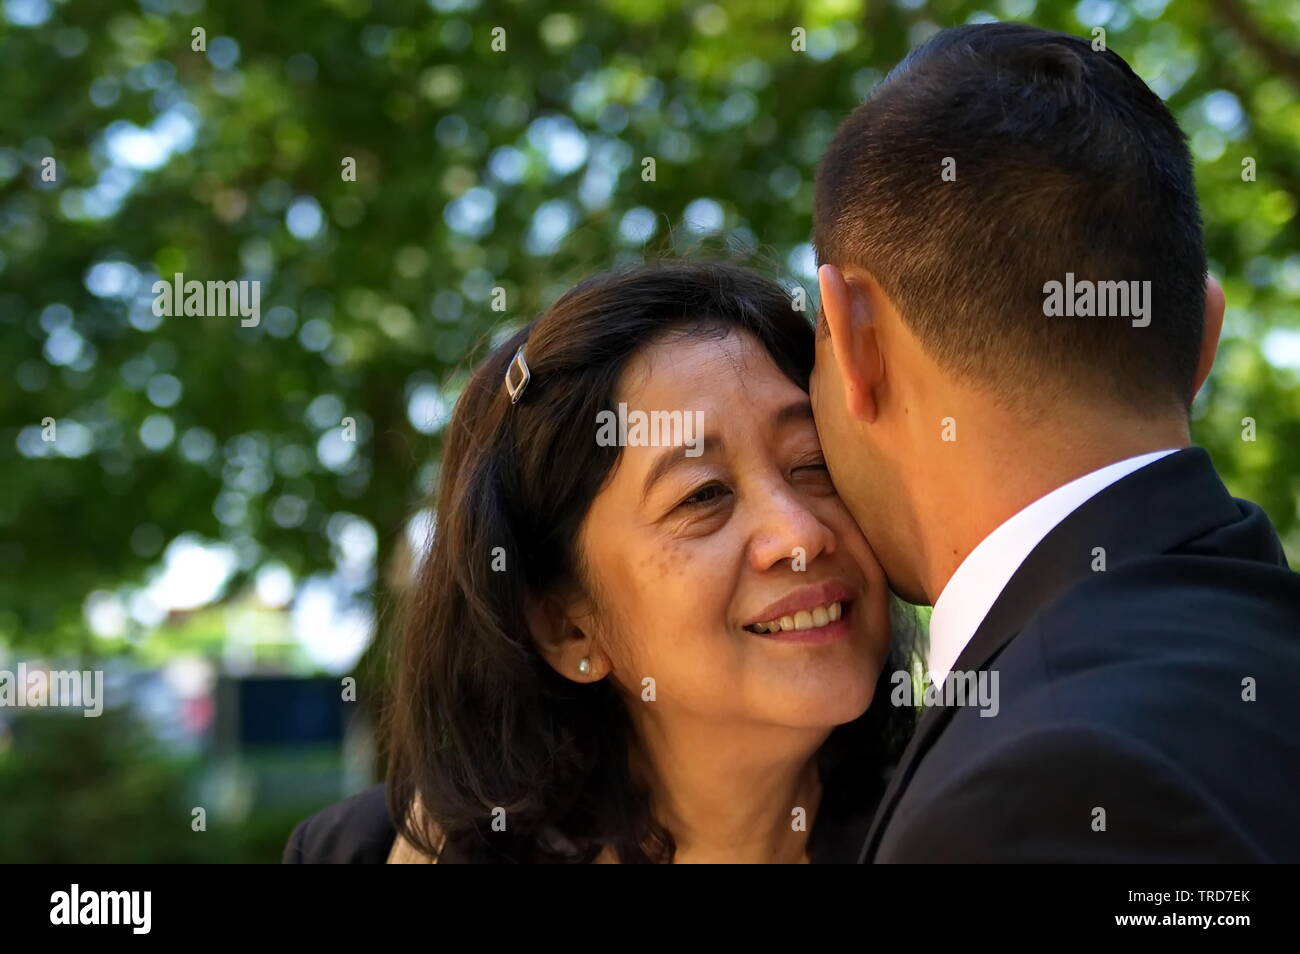 New York City, NY / USA - June 24, 2016: Mother and son embracing during a difficult time Stock Photo